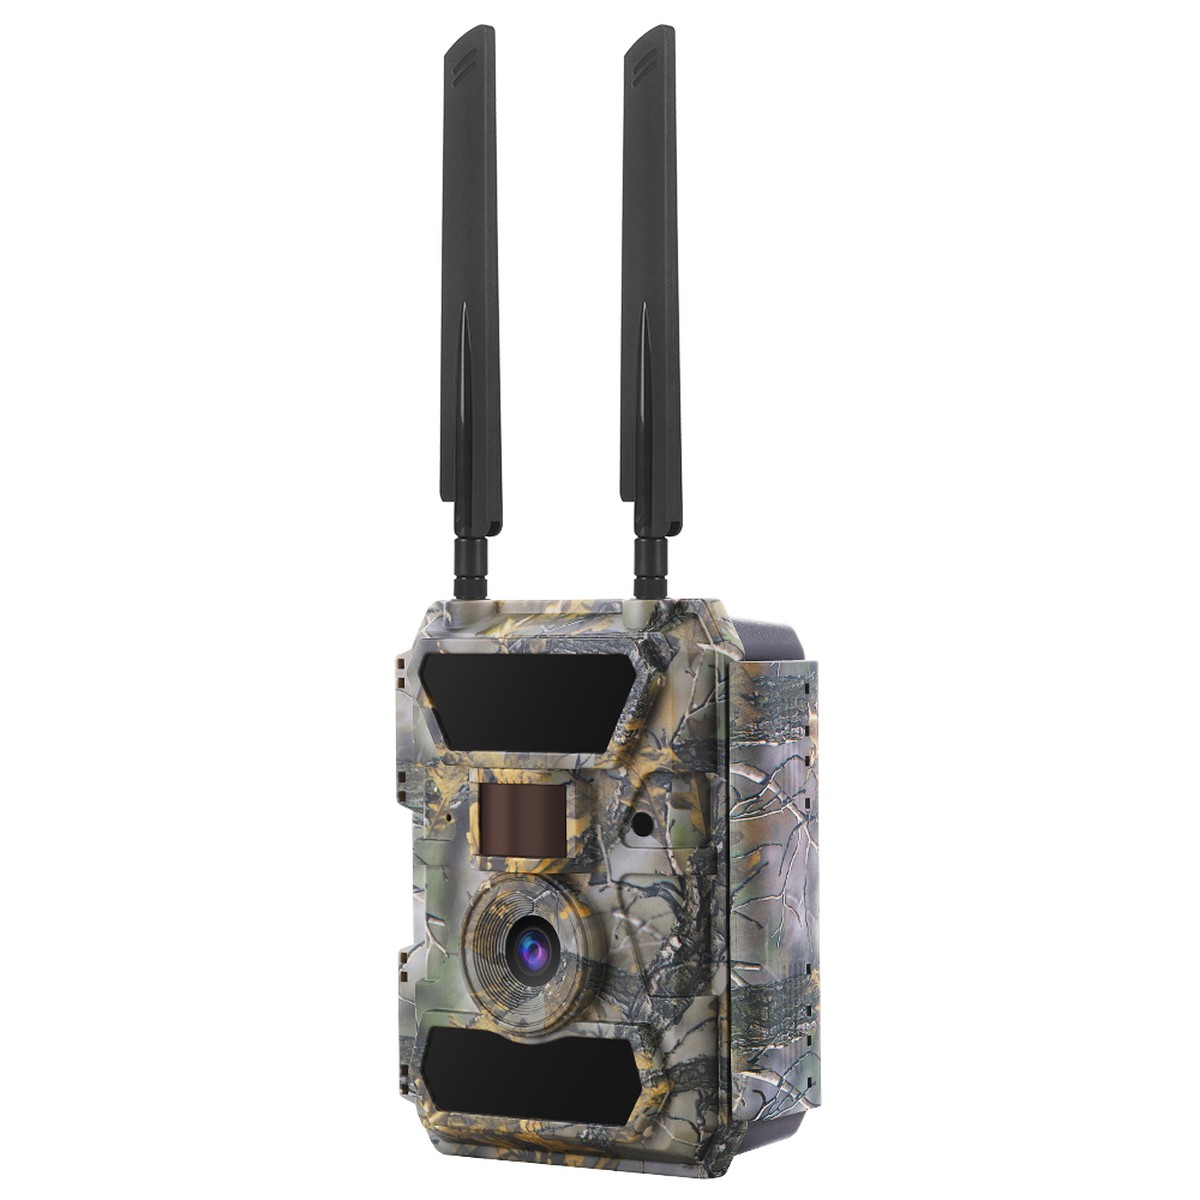   Camera Exterieure Hd Special Chasse 4G, Pieges Photographiques  200x120x91mm